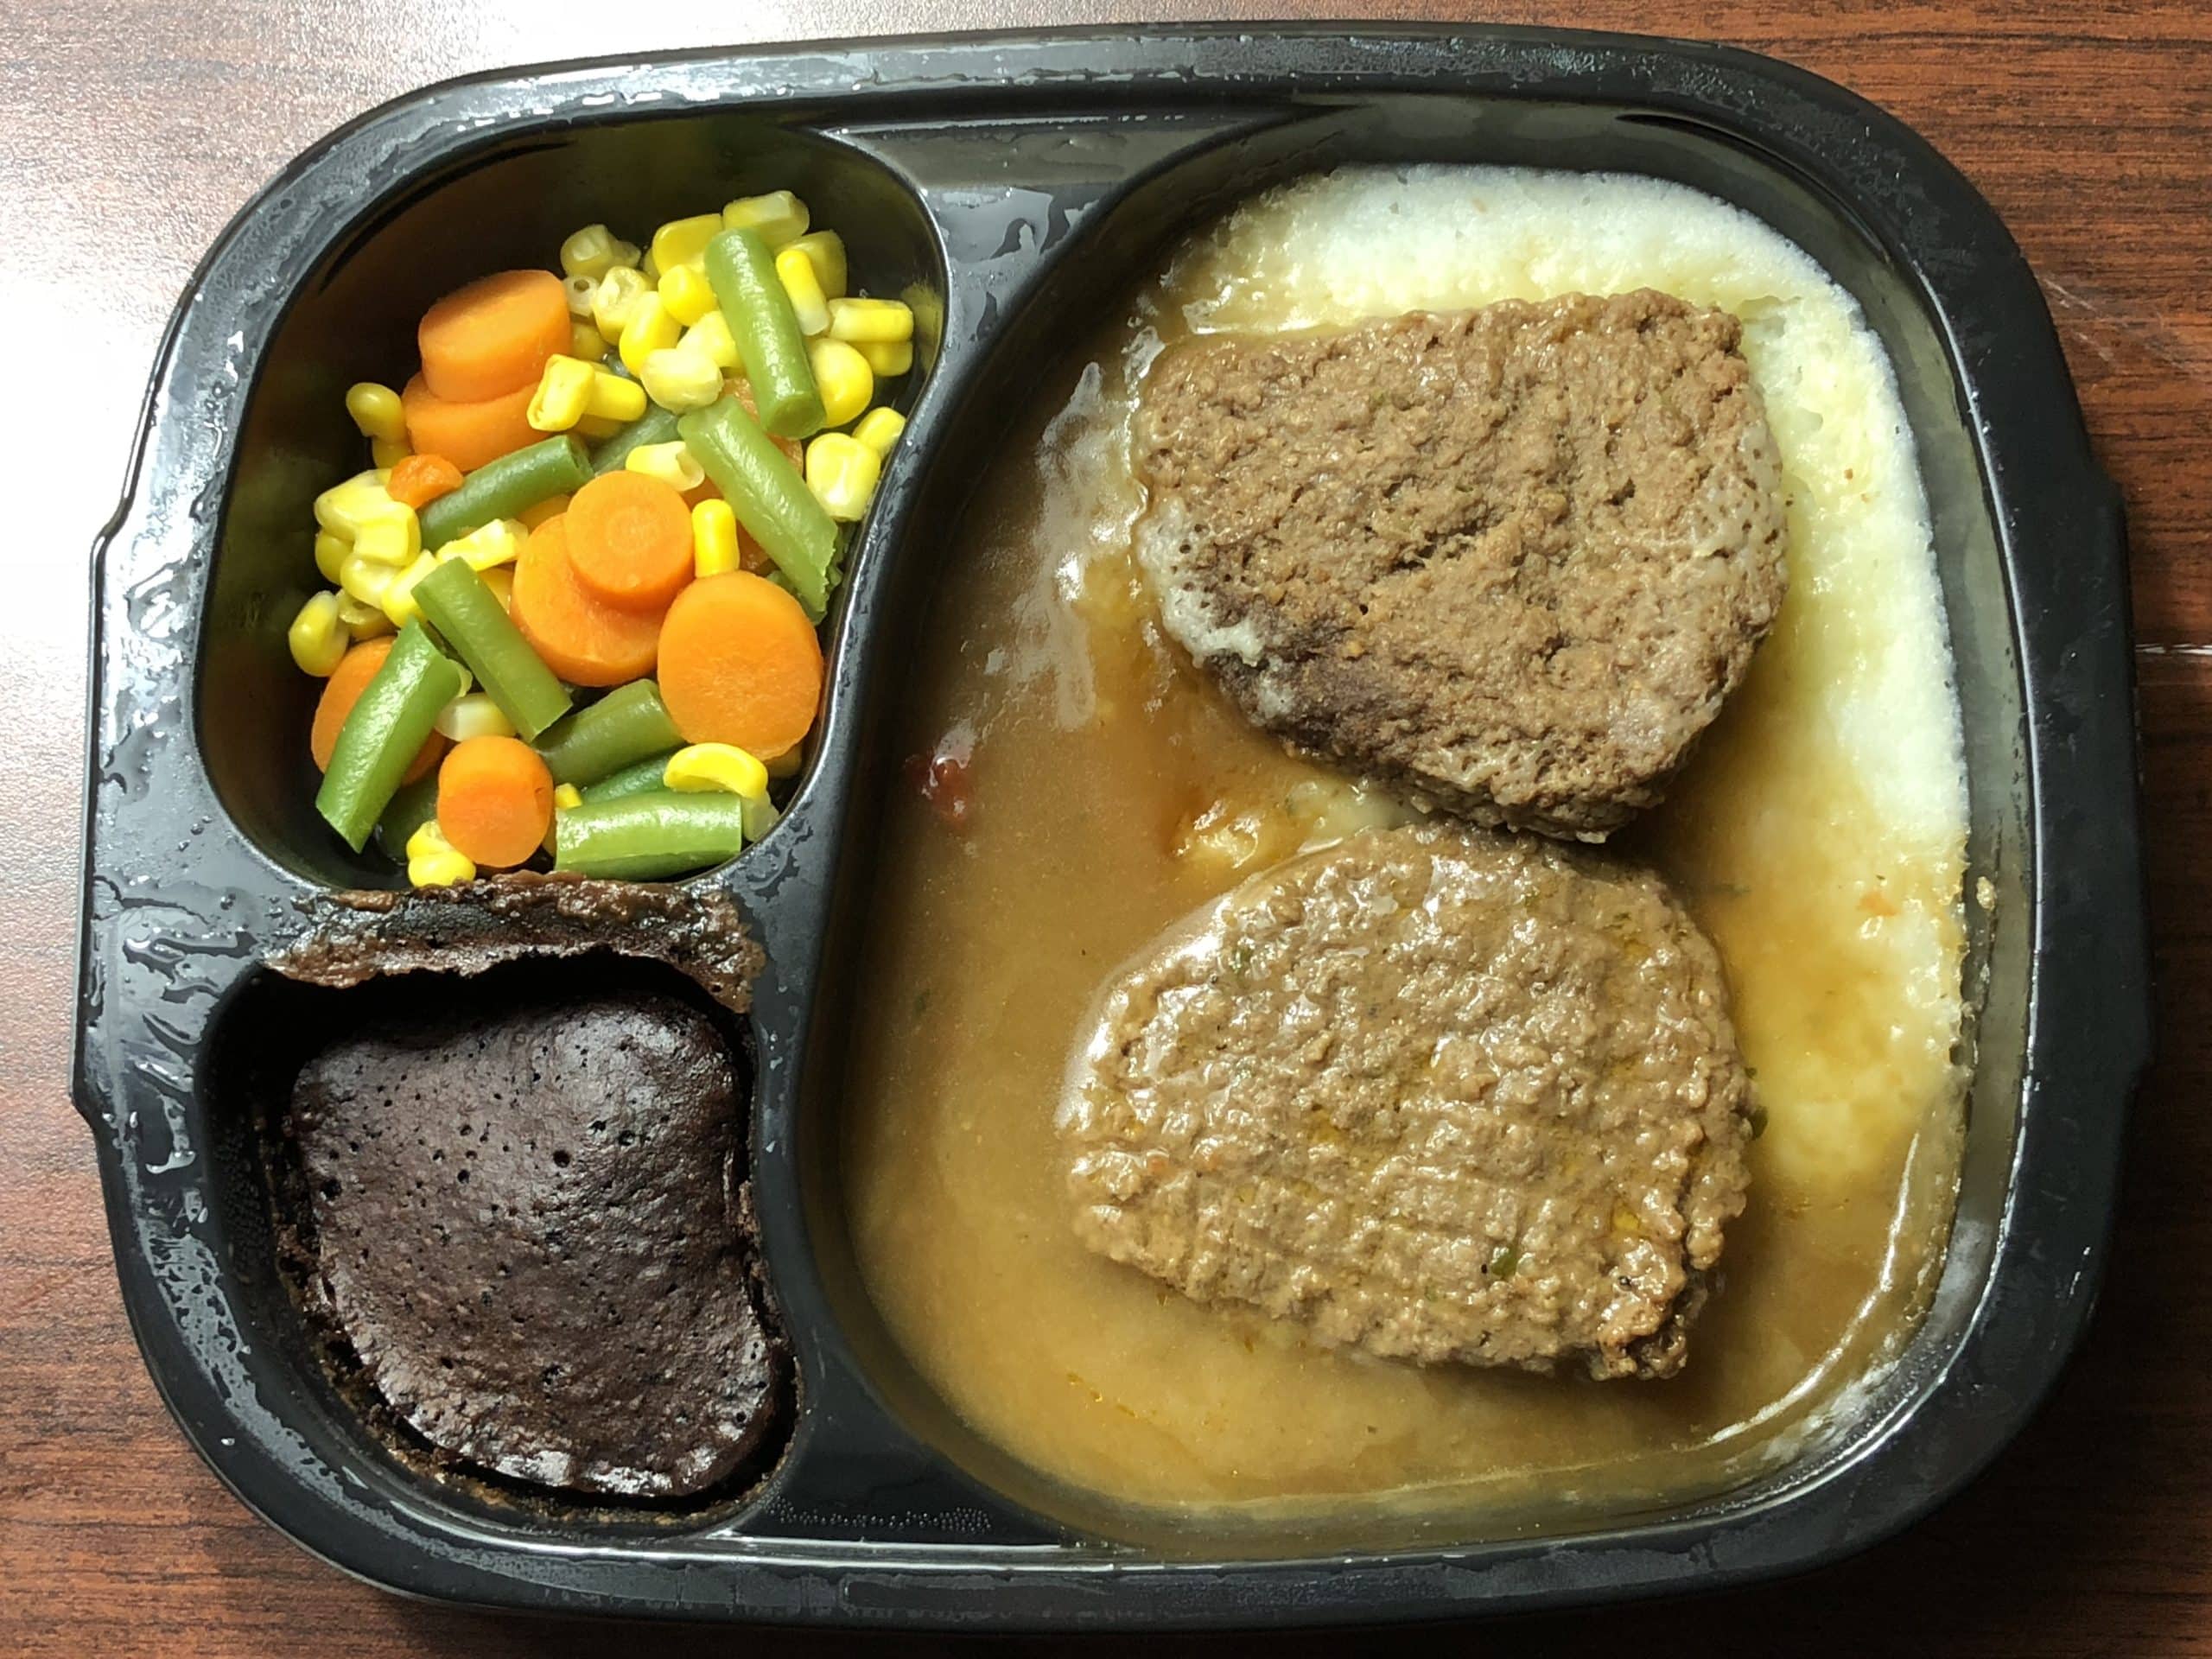 Meat loaf and mashed potatoes meal 